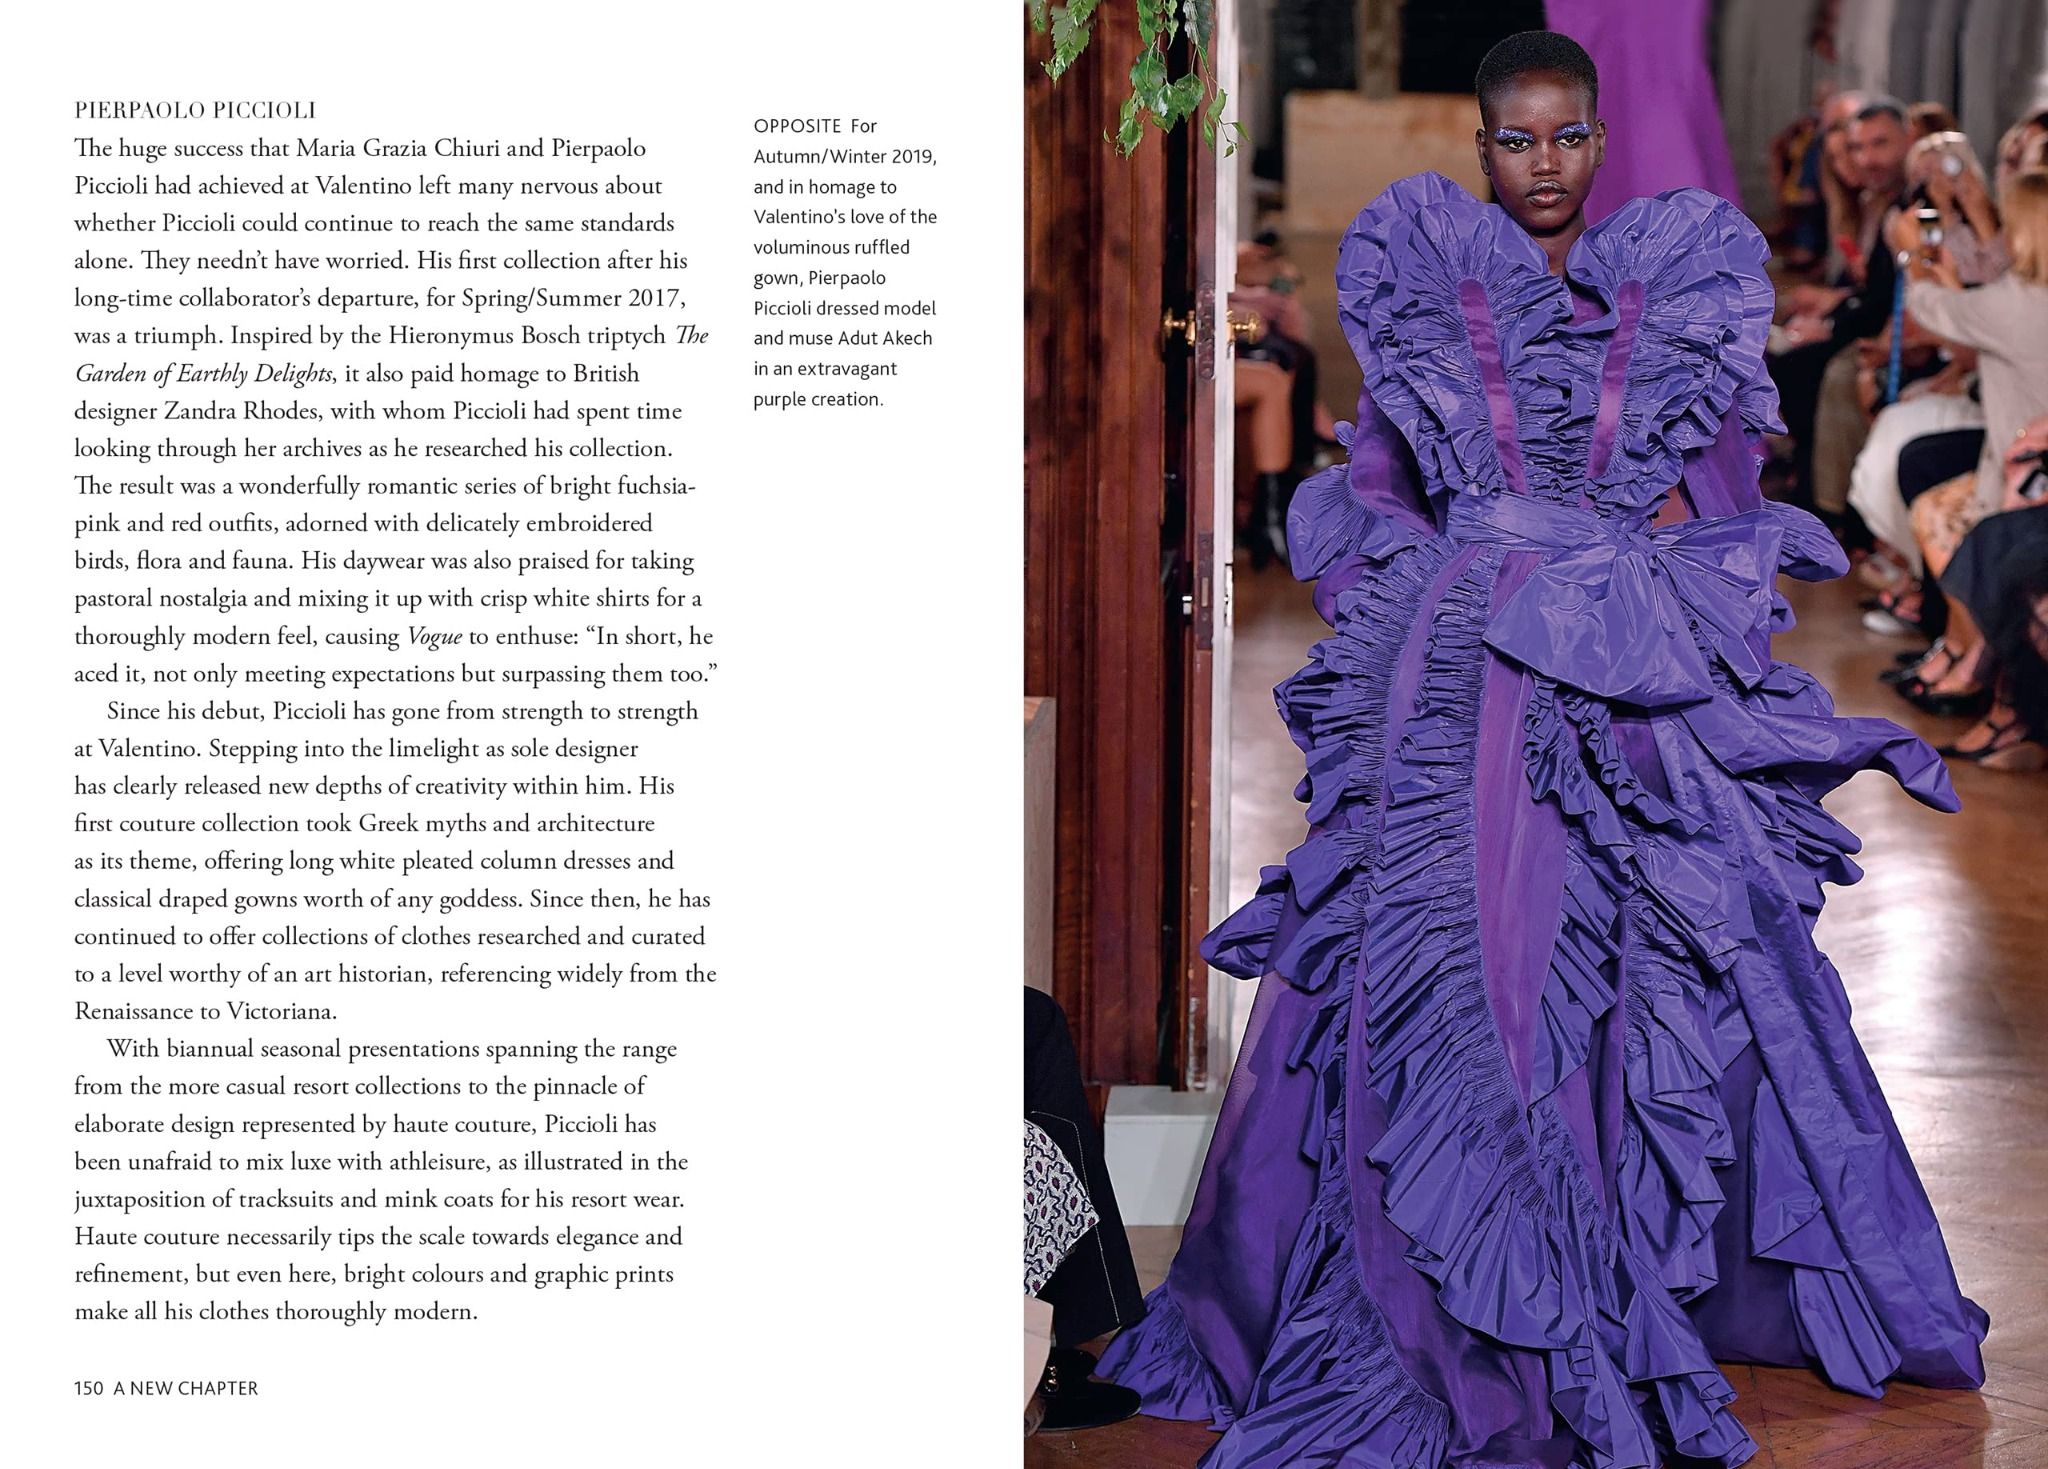 Little Book Of Valentino: The Story Of The Iconic Fashion House By Karen  Homer